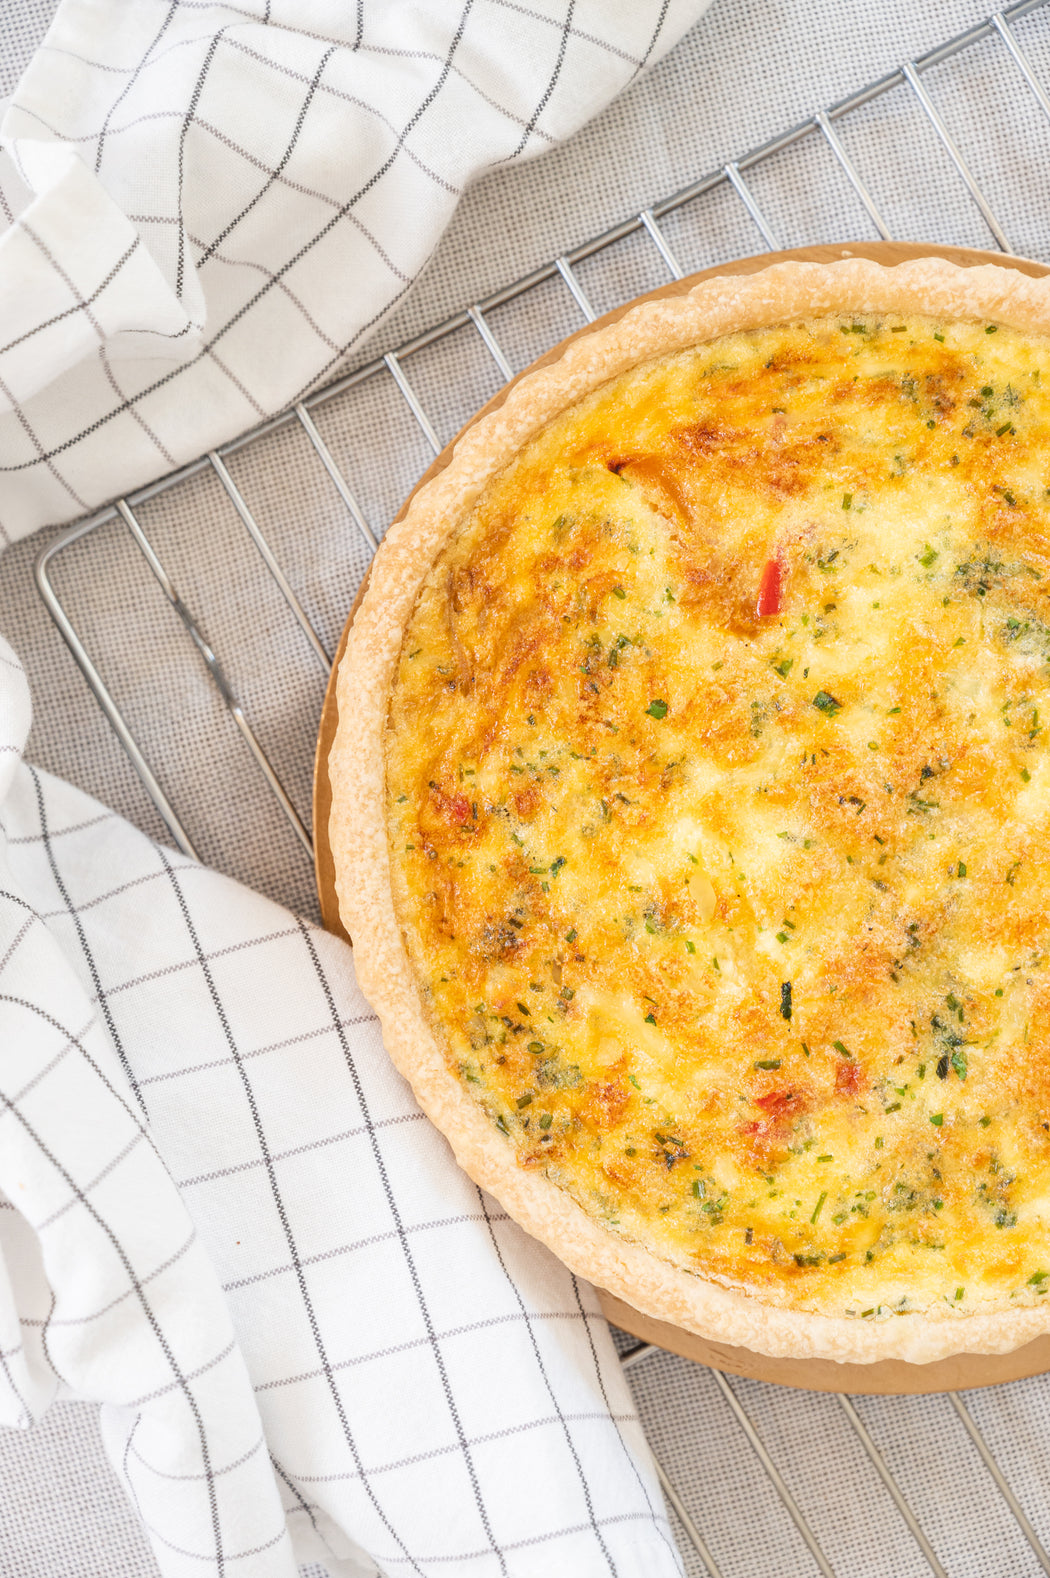 Savoury Tart - Caramelized Onions, Red Pepper, Emmental Cheese & Chives.